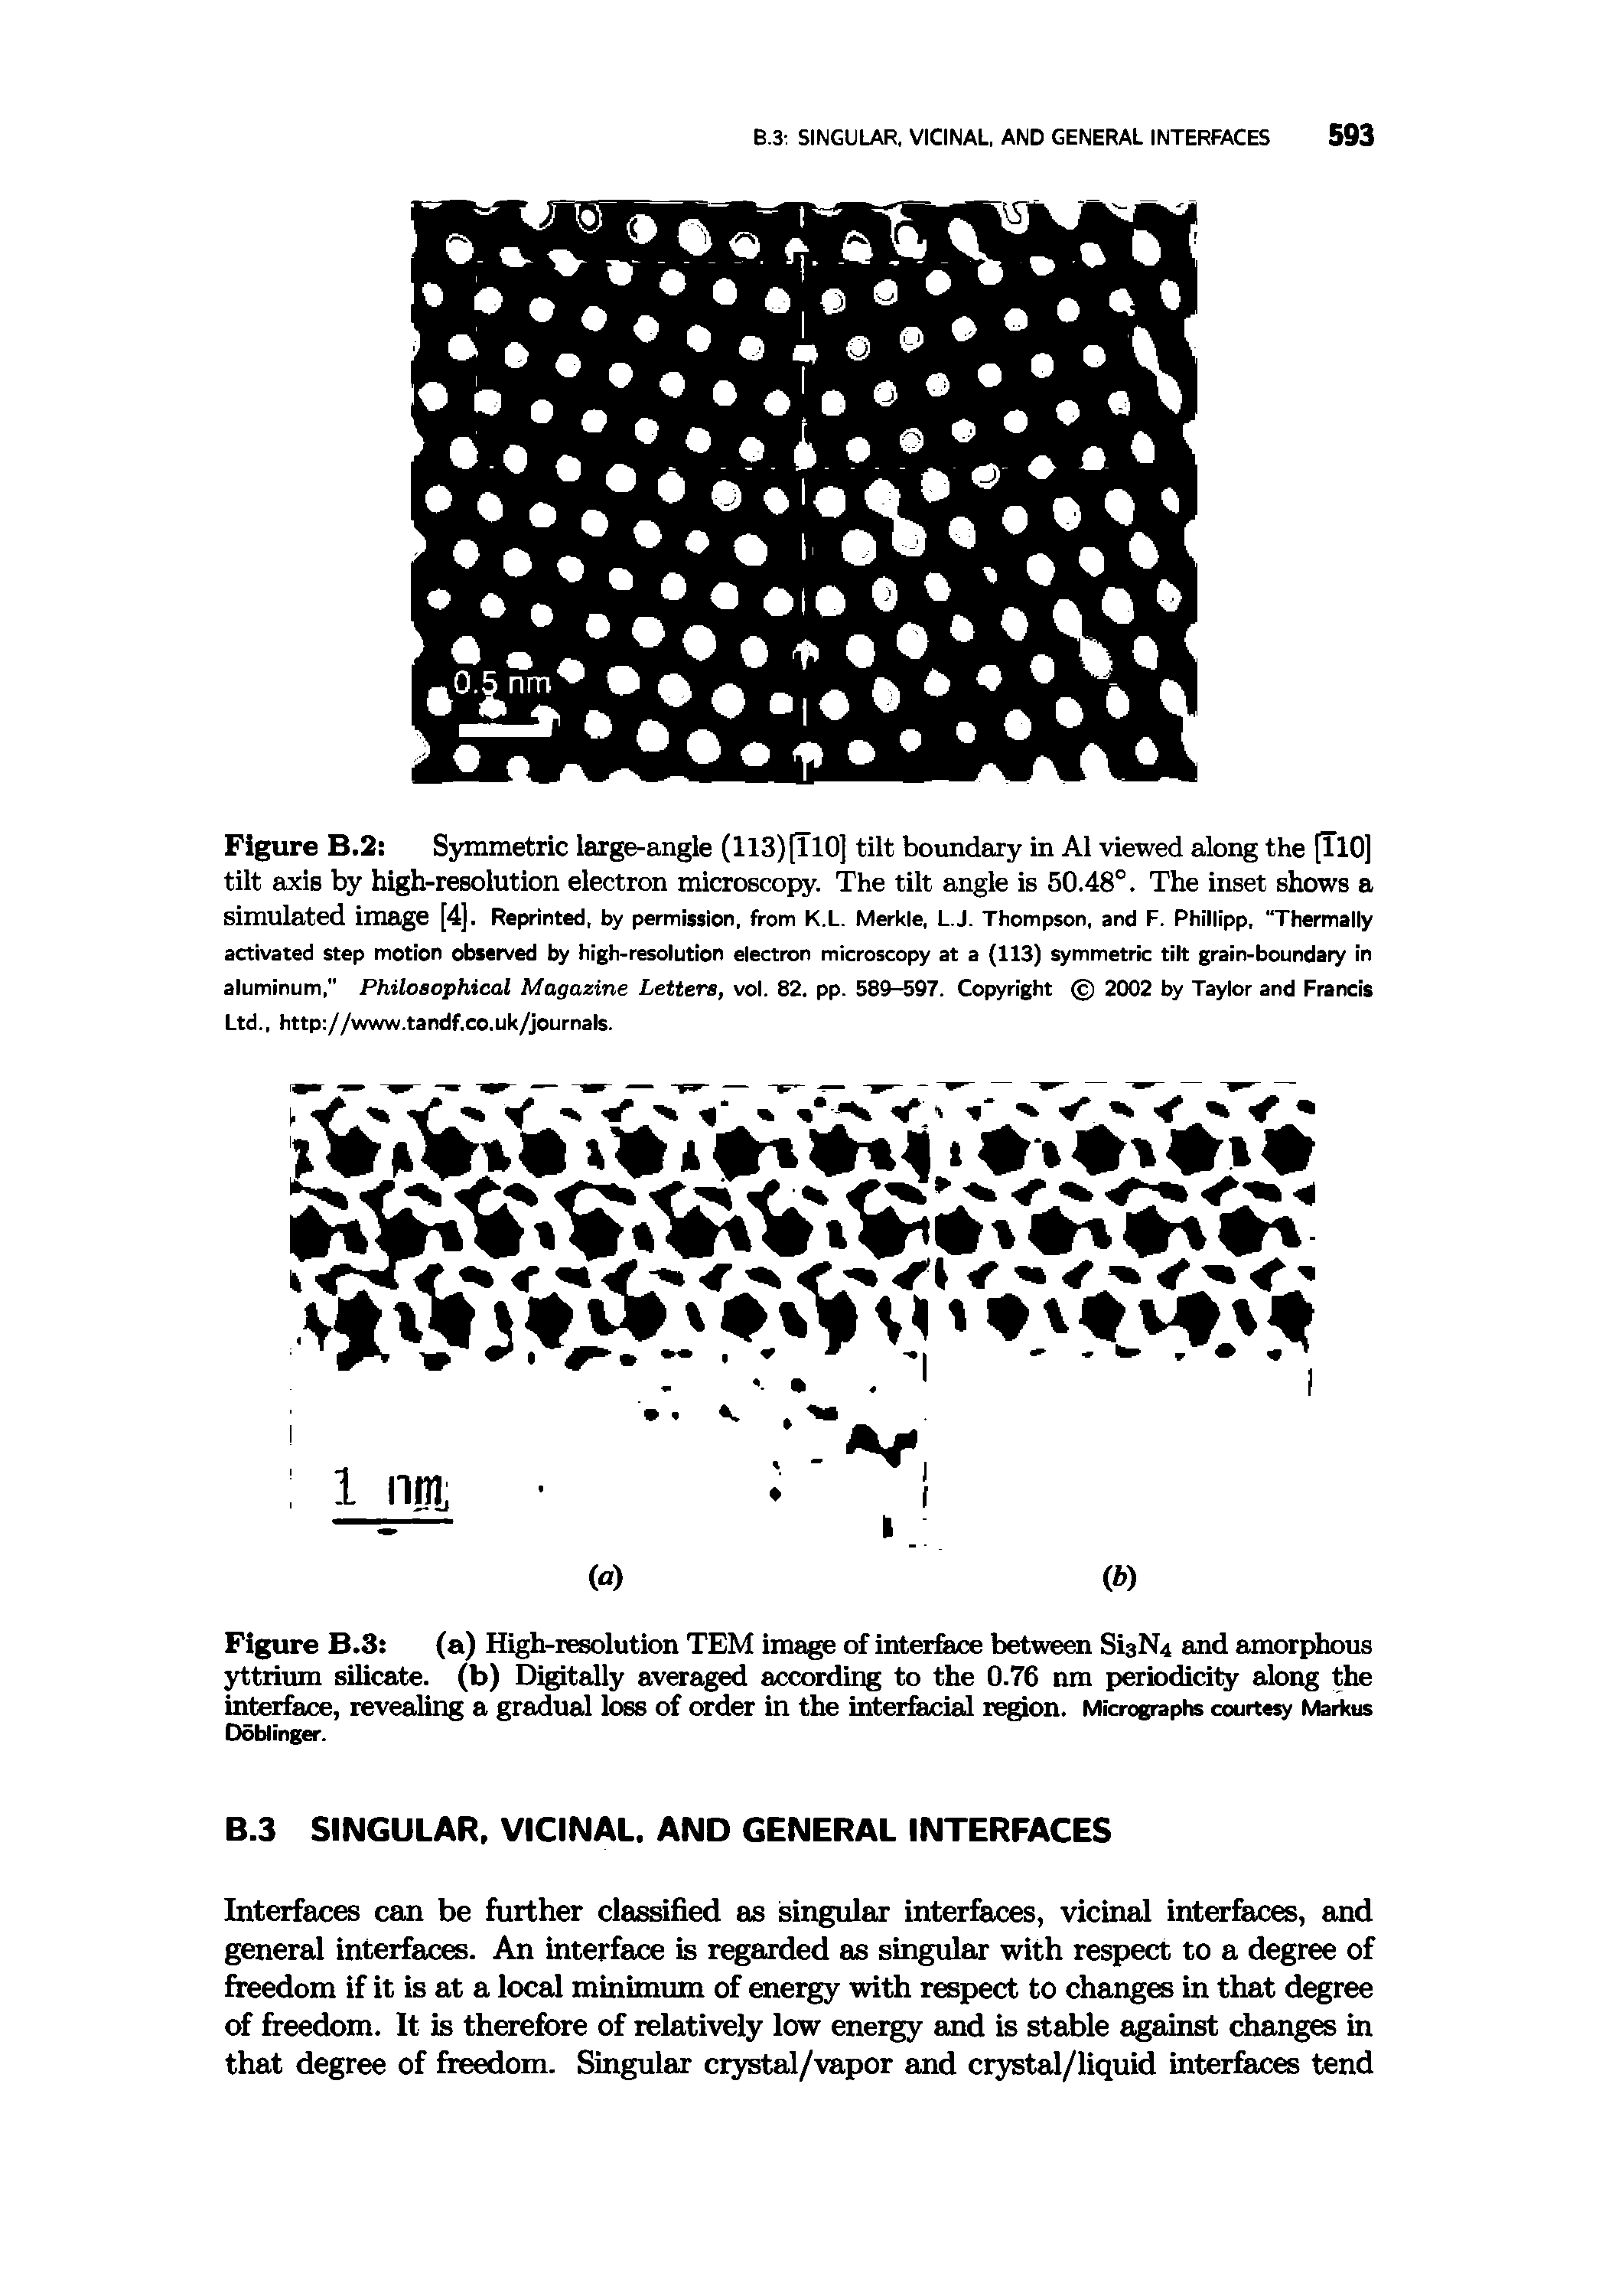 Figure B.2 Symmetric large-angle (113)(TlO] tilt boundary in A1 viewed along the [110] tilt axis by high-resolution electron microscopy. The tilt angle is 50.48°. The inset shows a simulated image [4], Reprinted, by permission, from K.L. Merkle, L.J. Thompson, and F. Phillipp, Thermally activated step motion observed by high-resolution electron microscopy at a (113) symmetric tilt grain-boundary in aluminum," Philosophical Magazine Letters, vol. 82. pp. 589-597. Copyright (c) 2002 by Taylor and Francis Ltd., http //www.tandf.co.uk/journals.